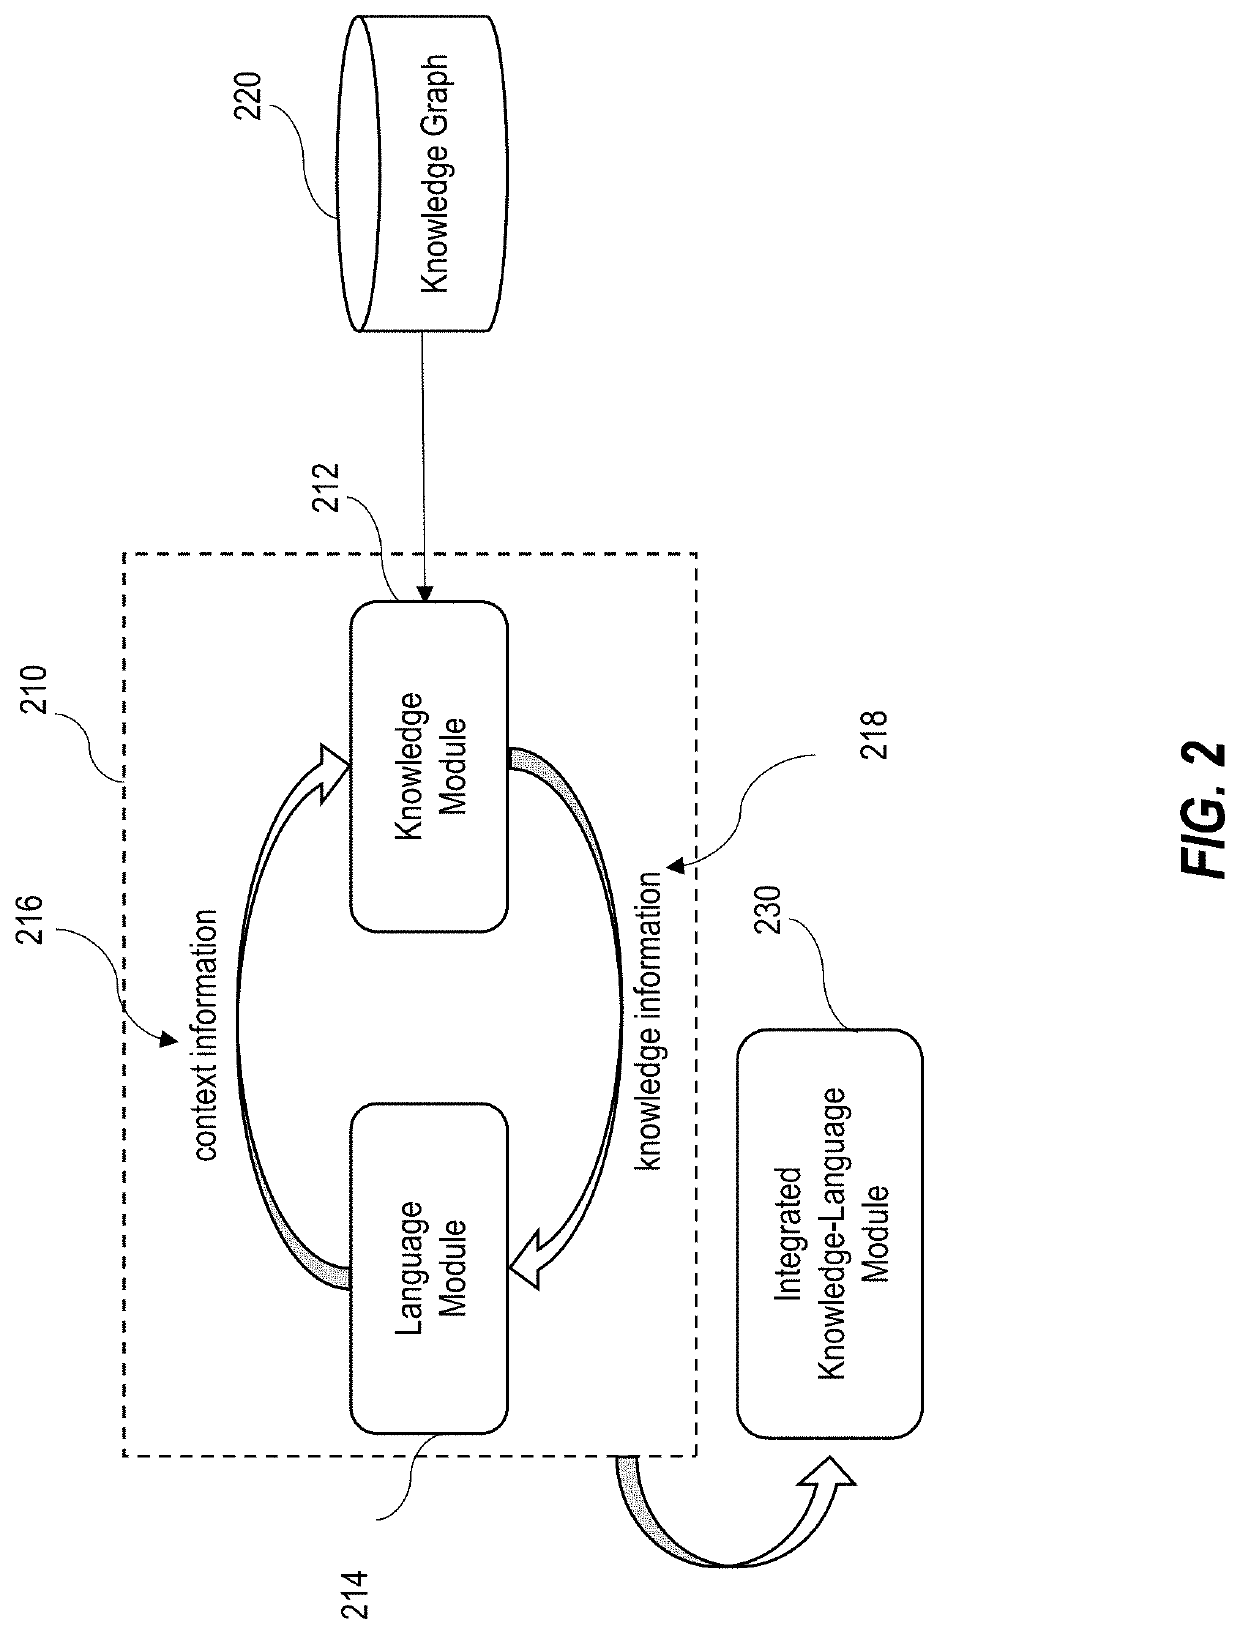 Generation of optimized spoken language understanding model through joint training with integrated knowledge-language module